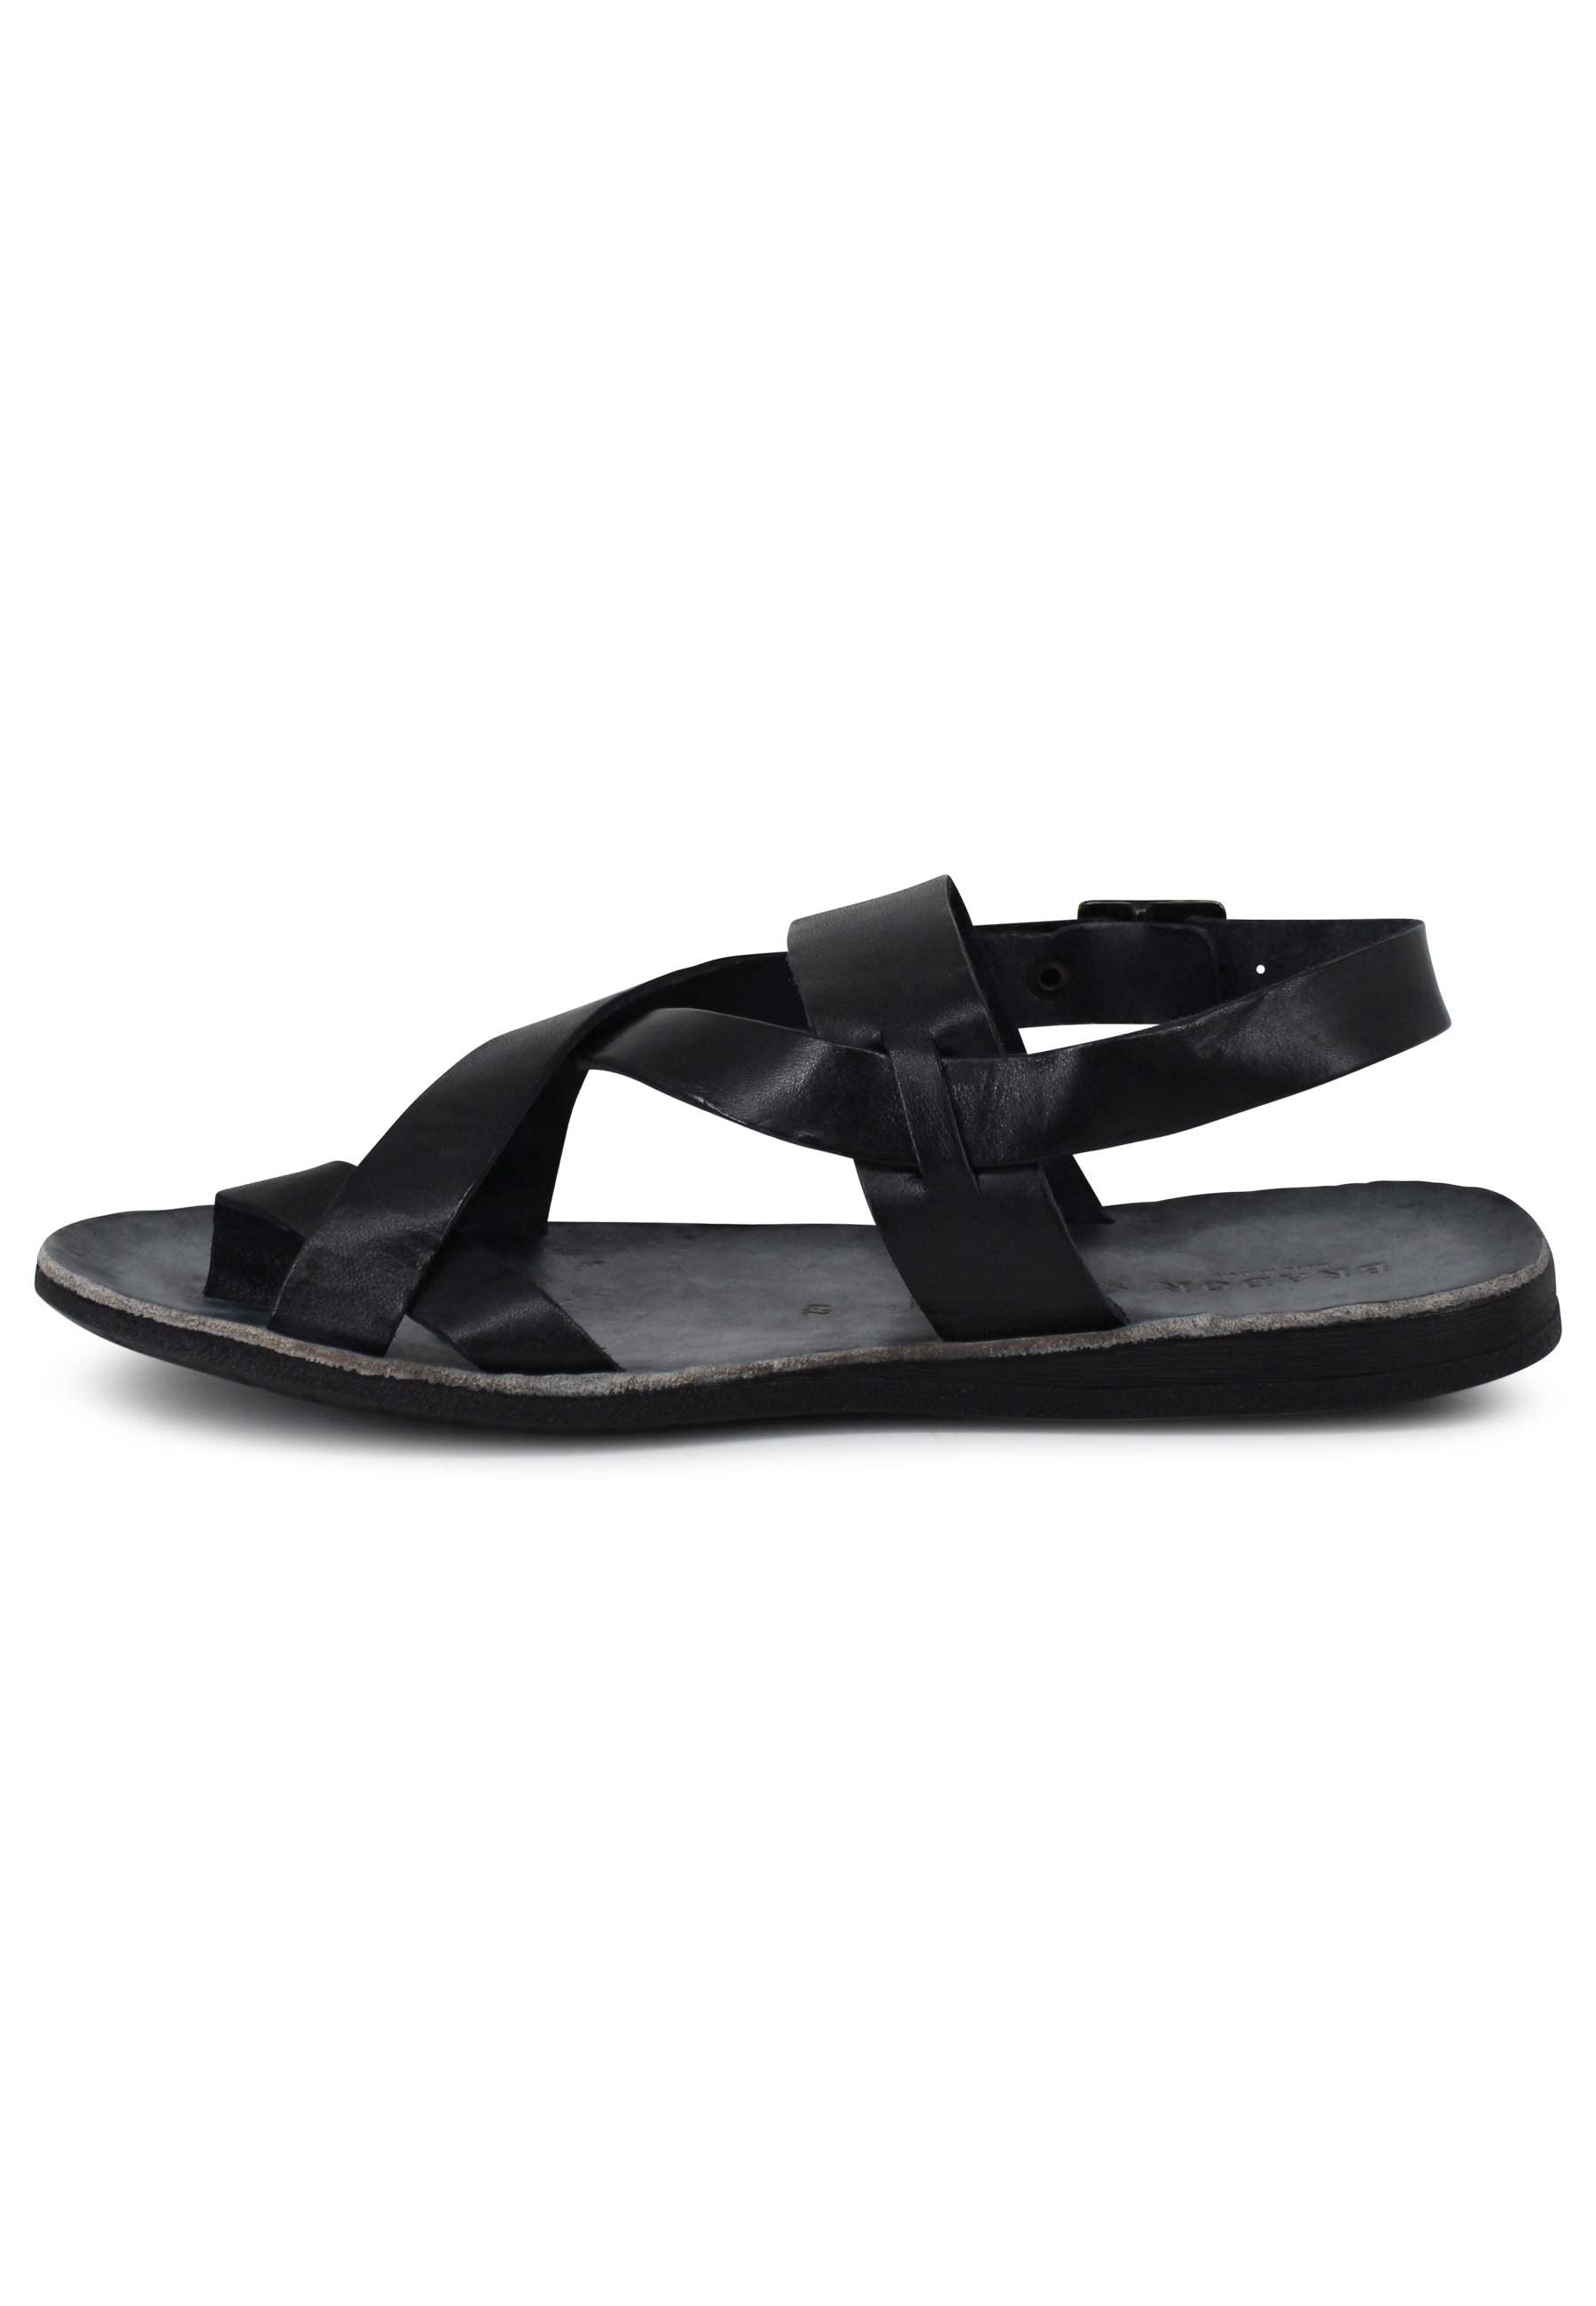 Men's black leather thong sandals with strap and buckle